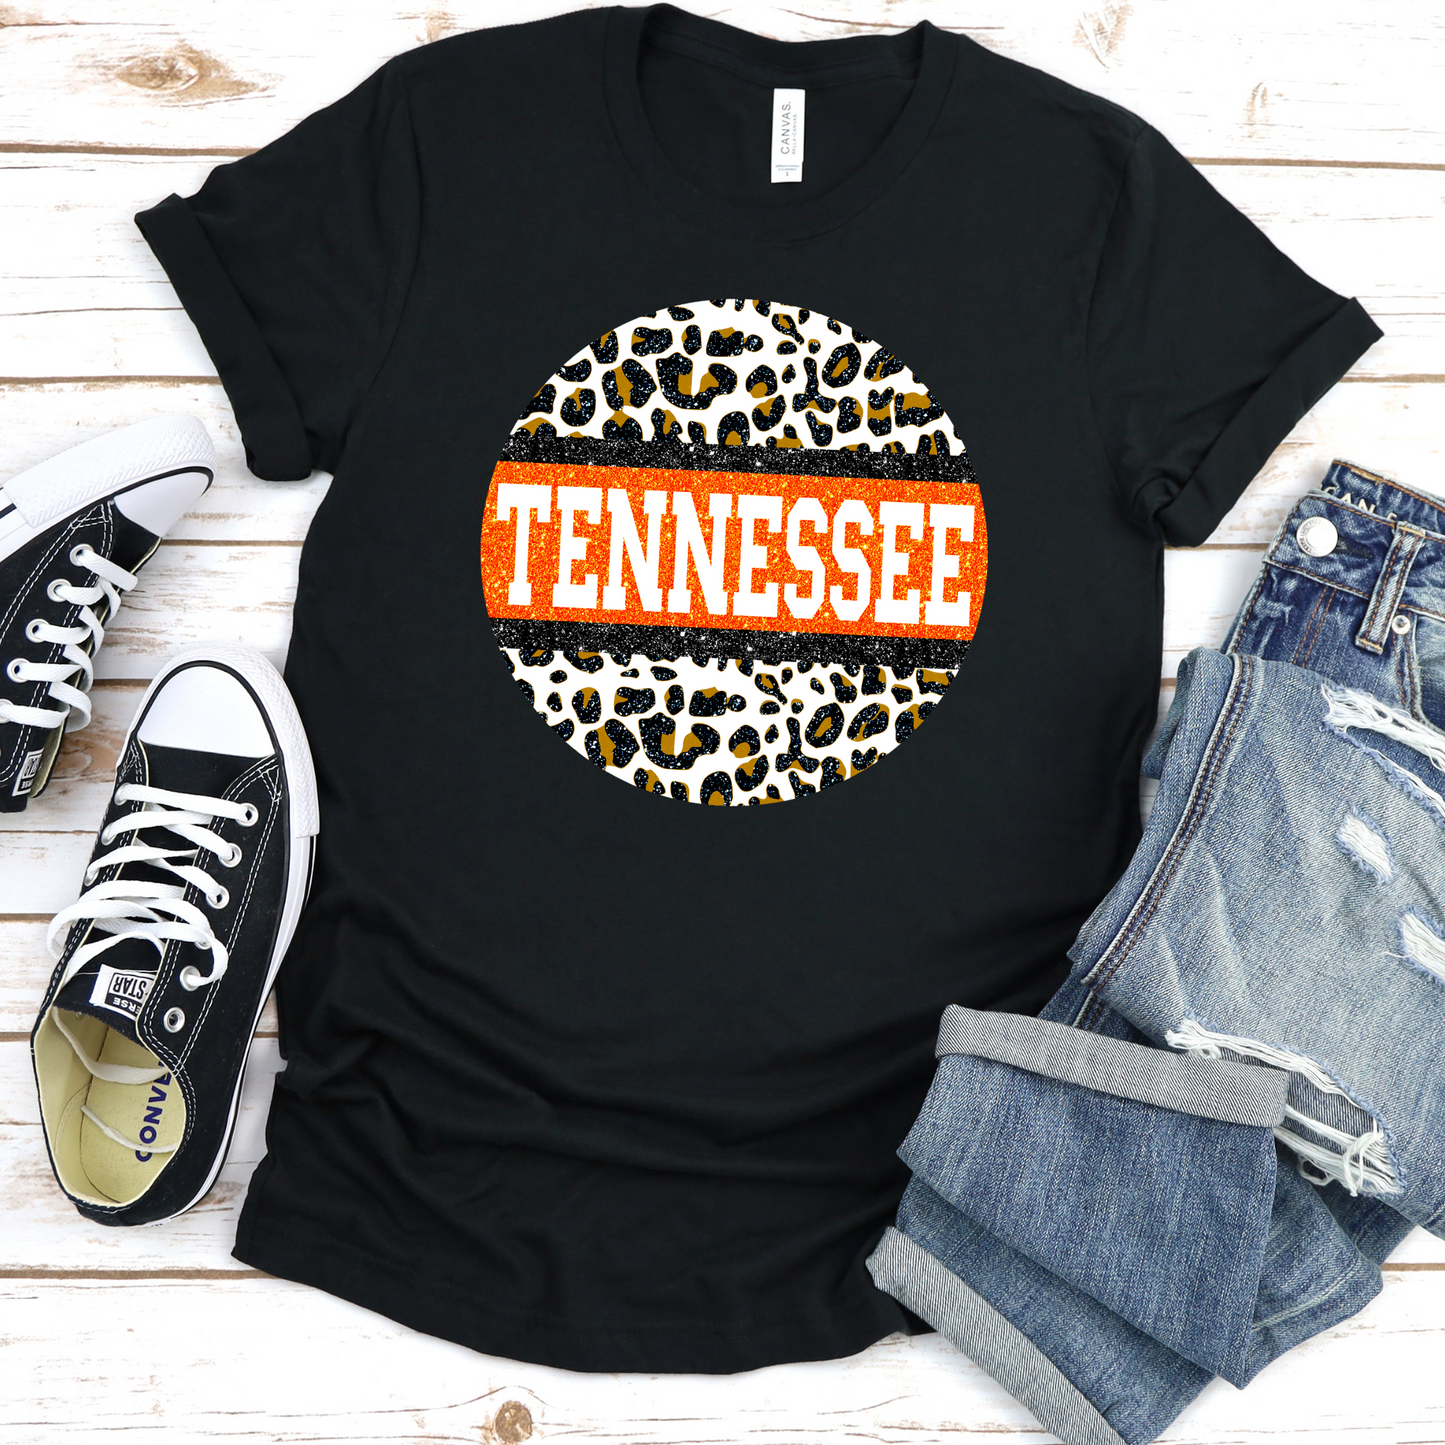 Tennessee Leopard Graphic Tee